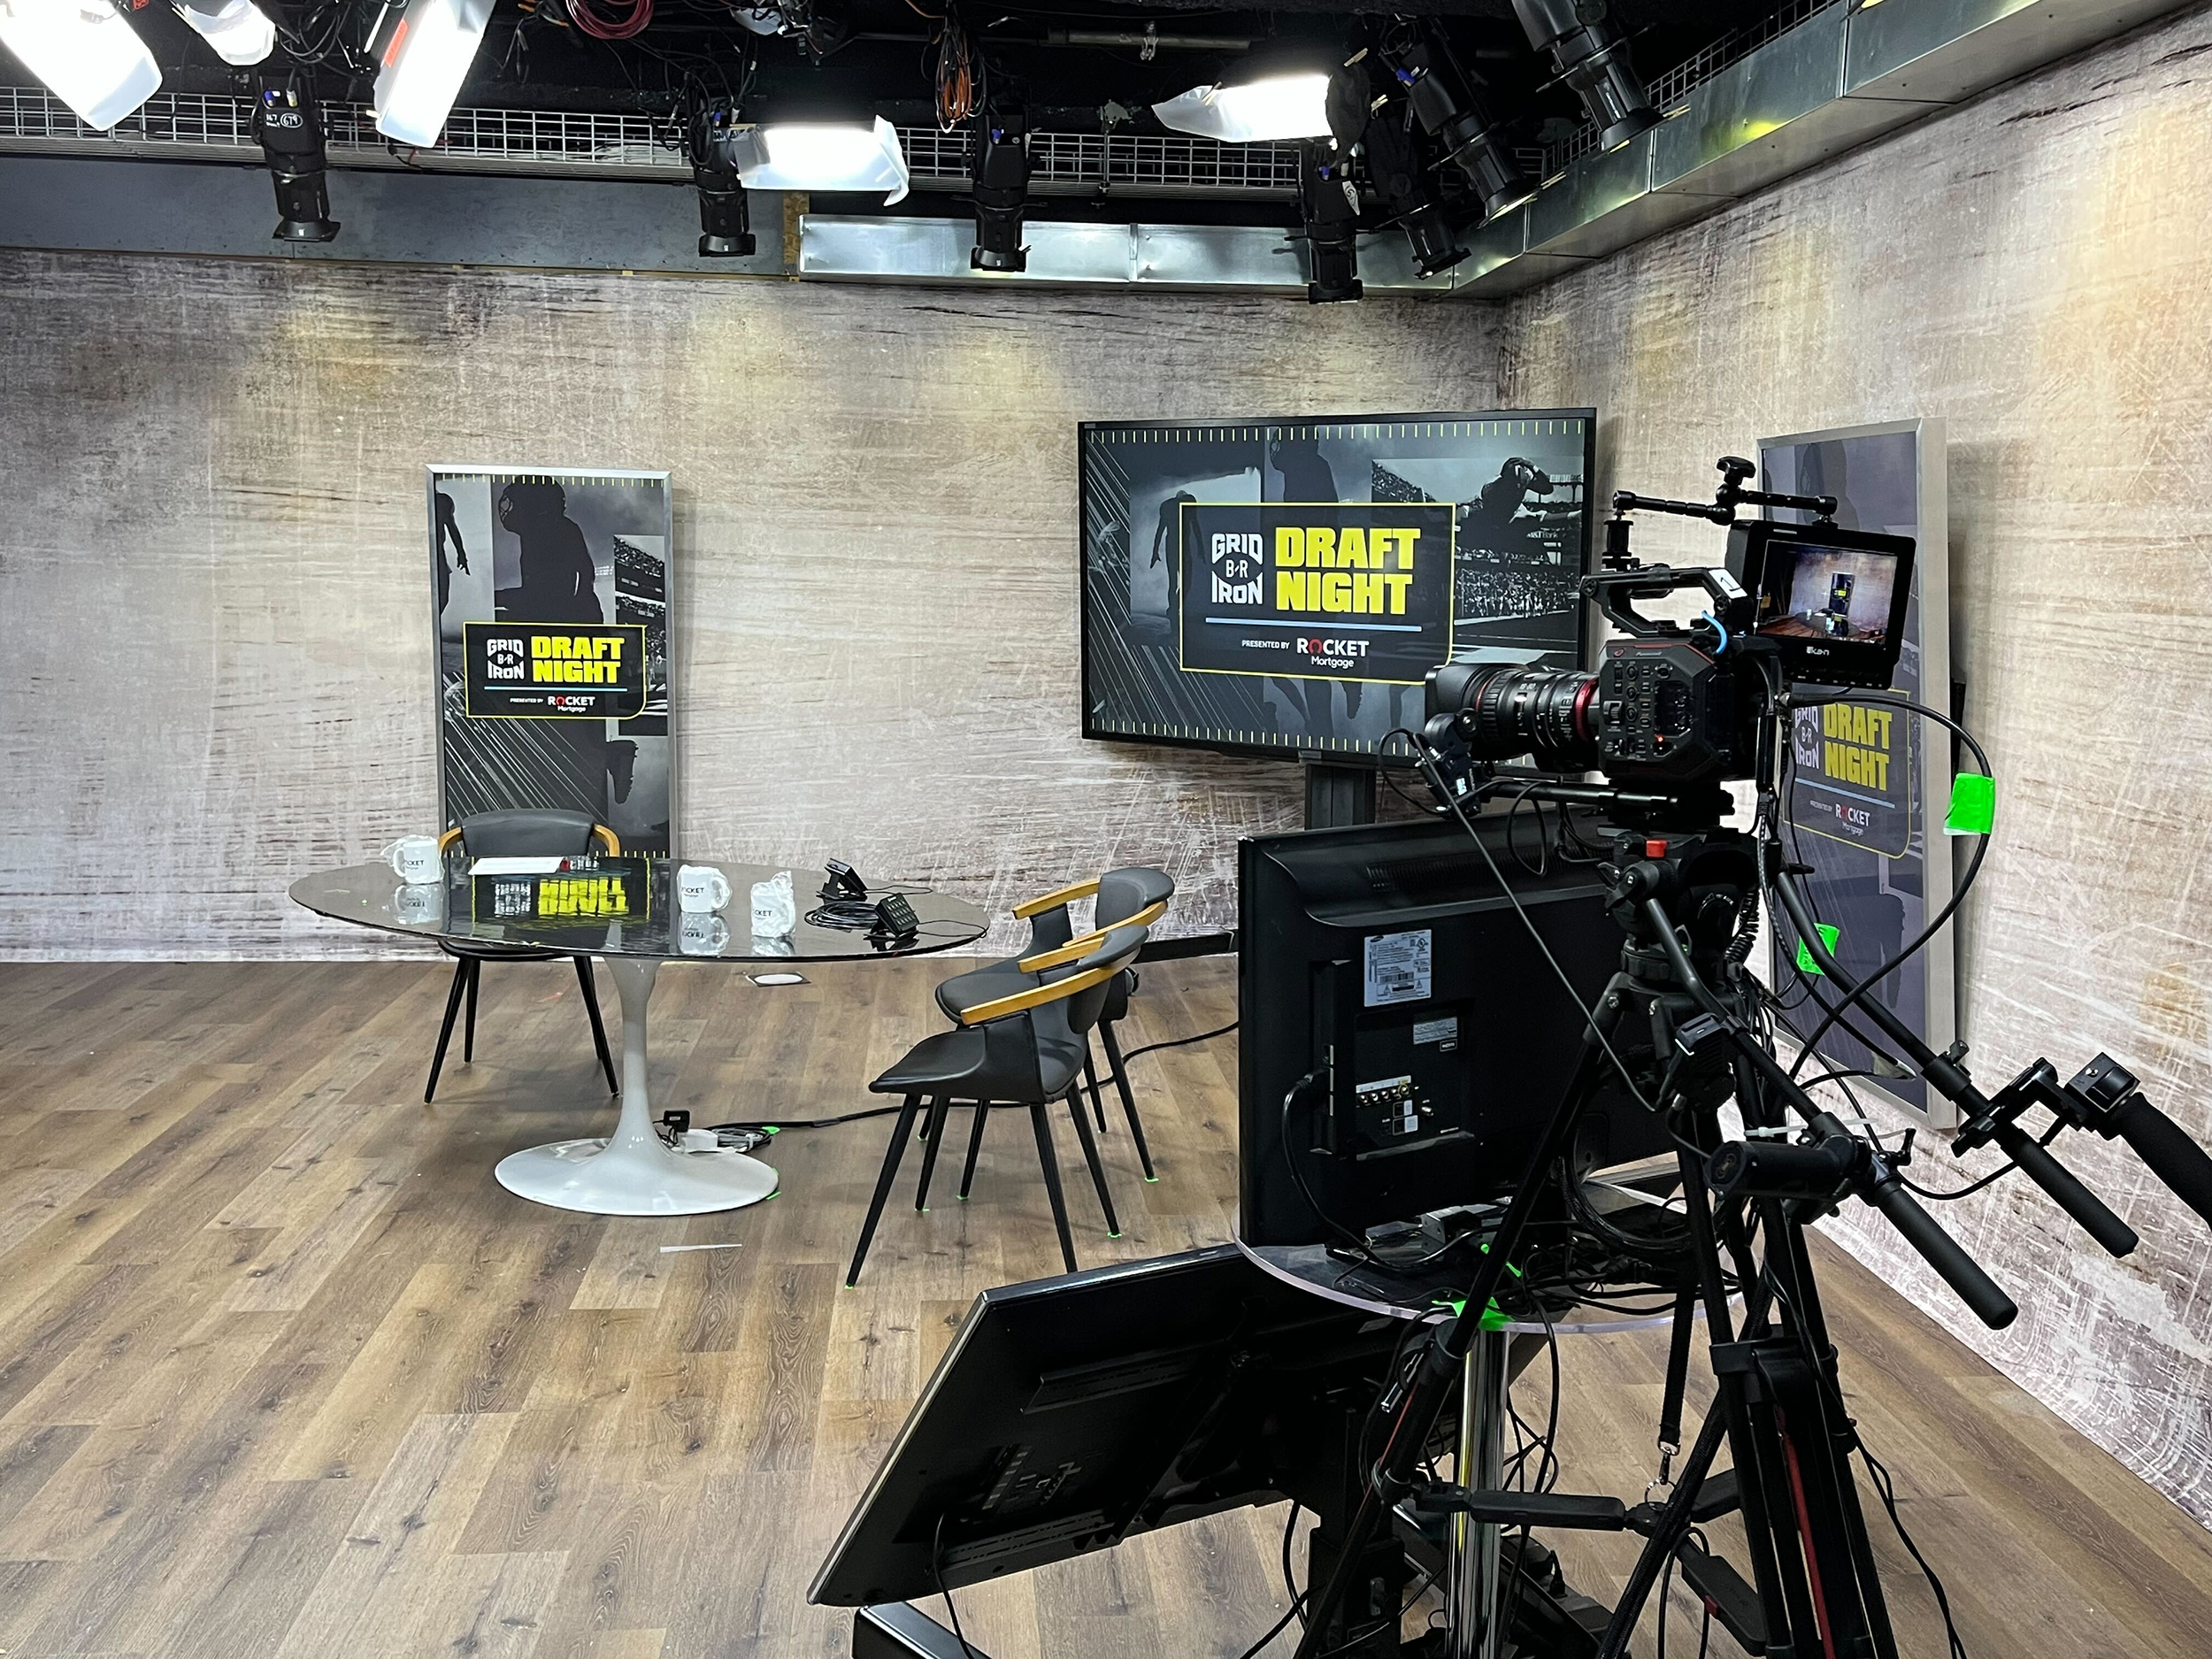 Live From 2022 NFL Draft Bleacher Report Streams Live From Newly Designed Set at New York City Headquarters